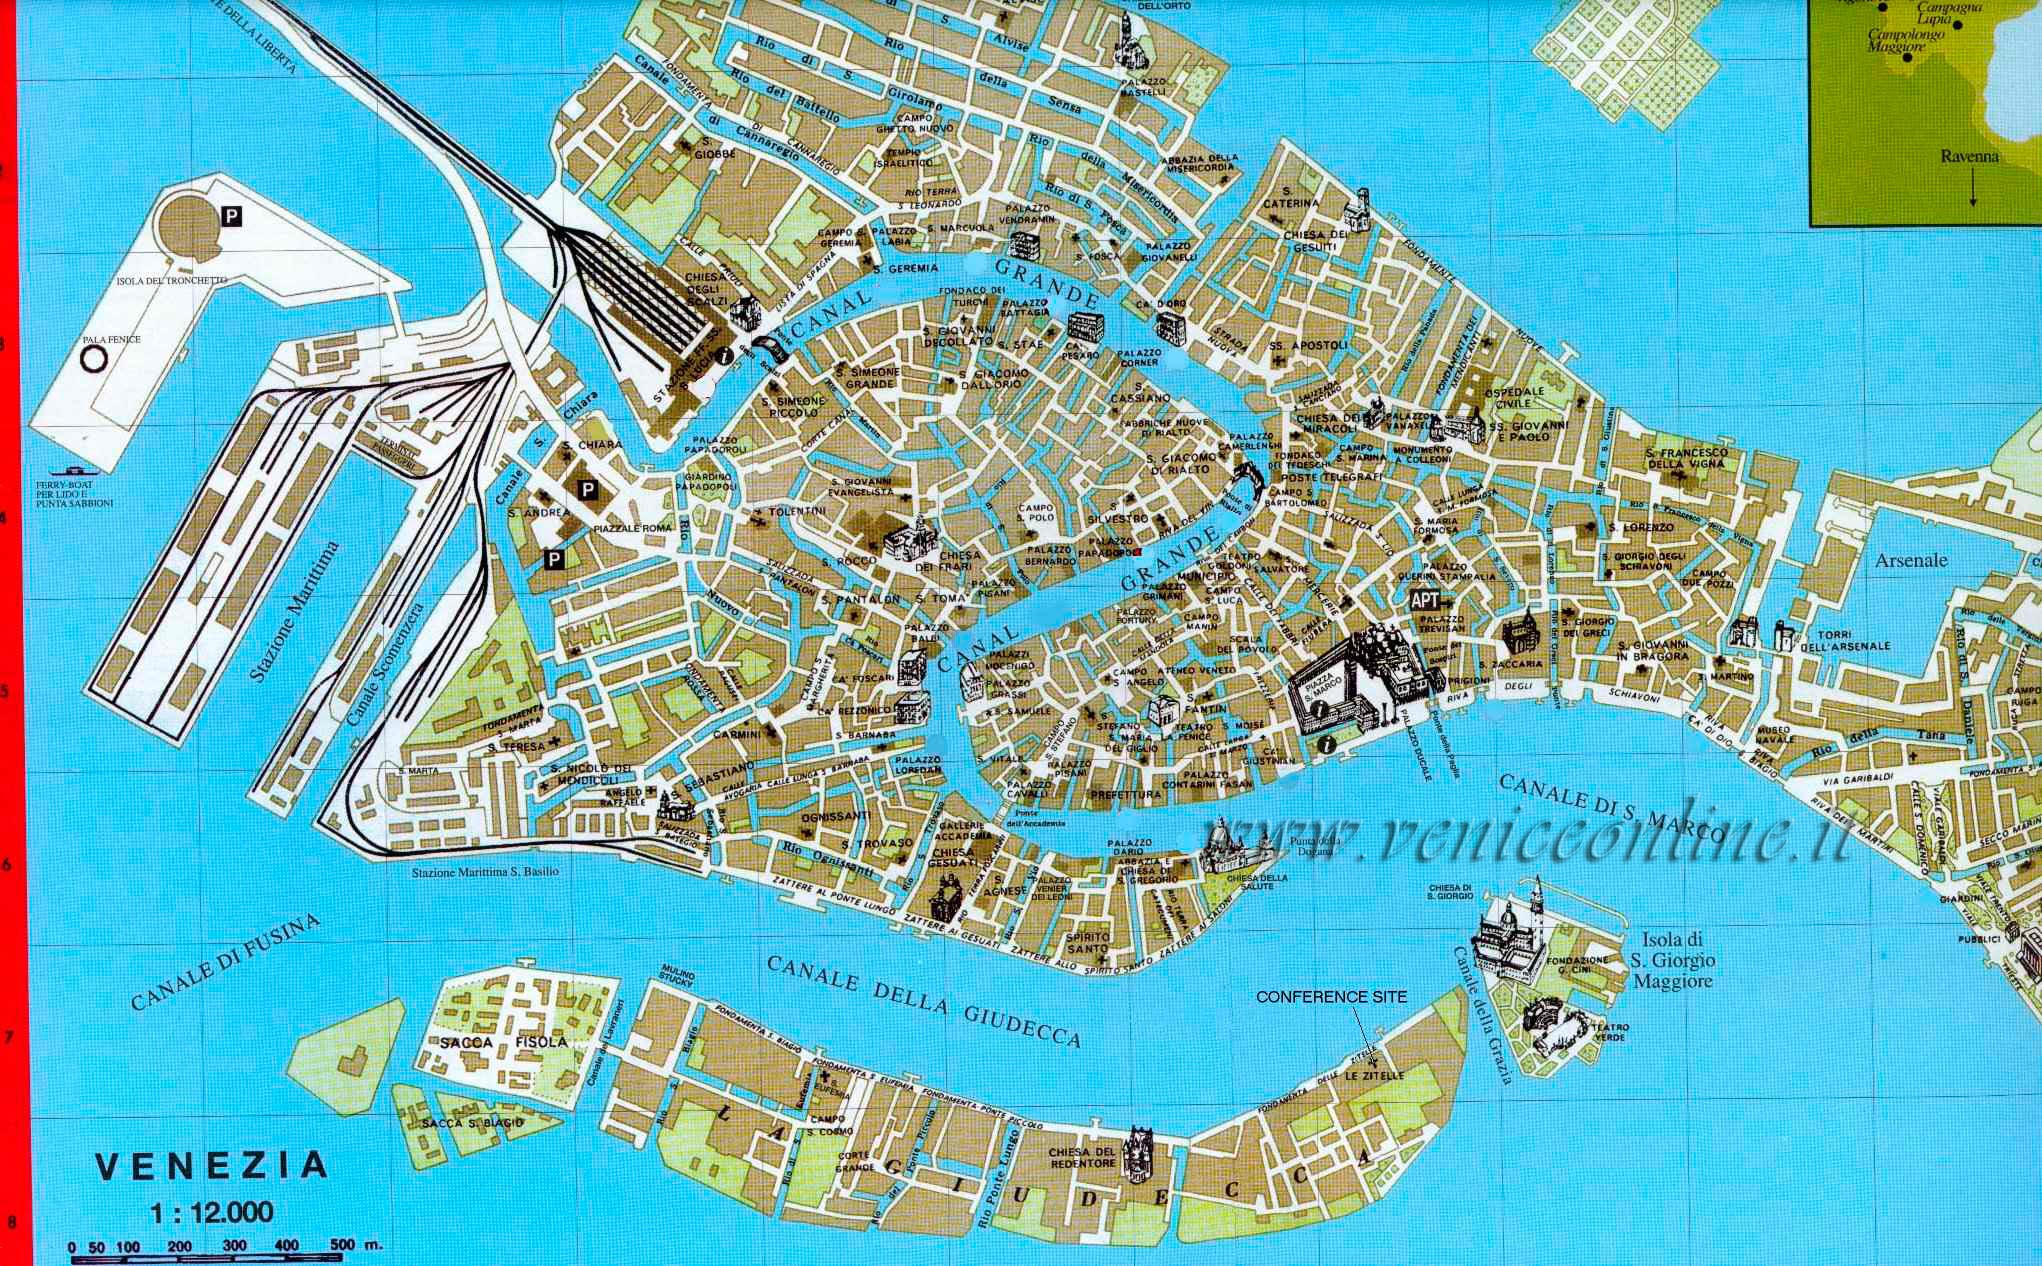 Venice canal map